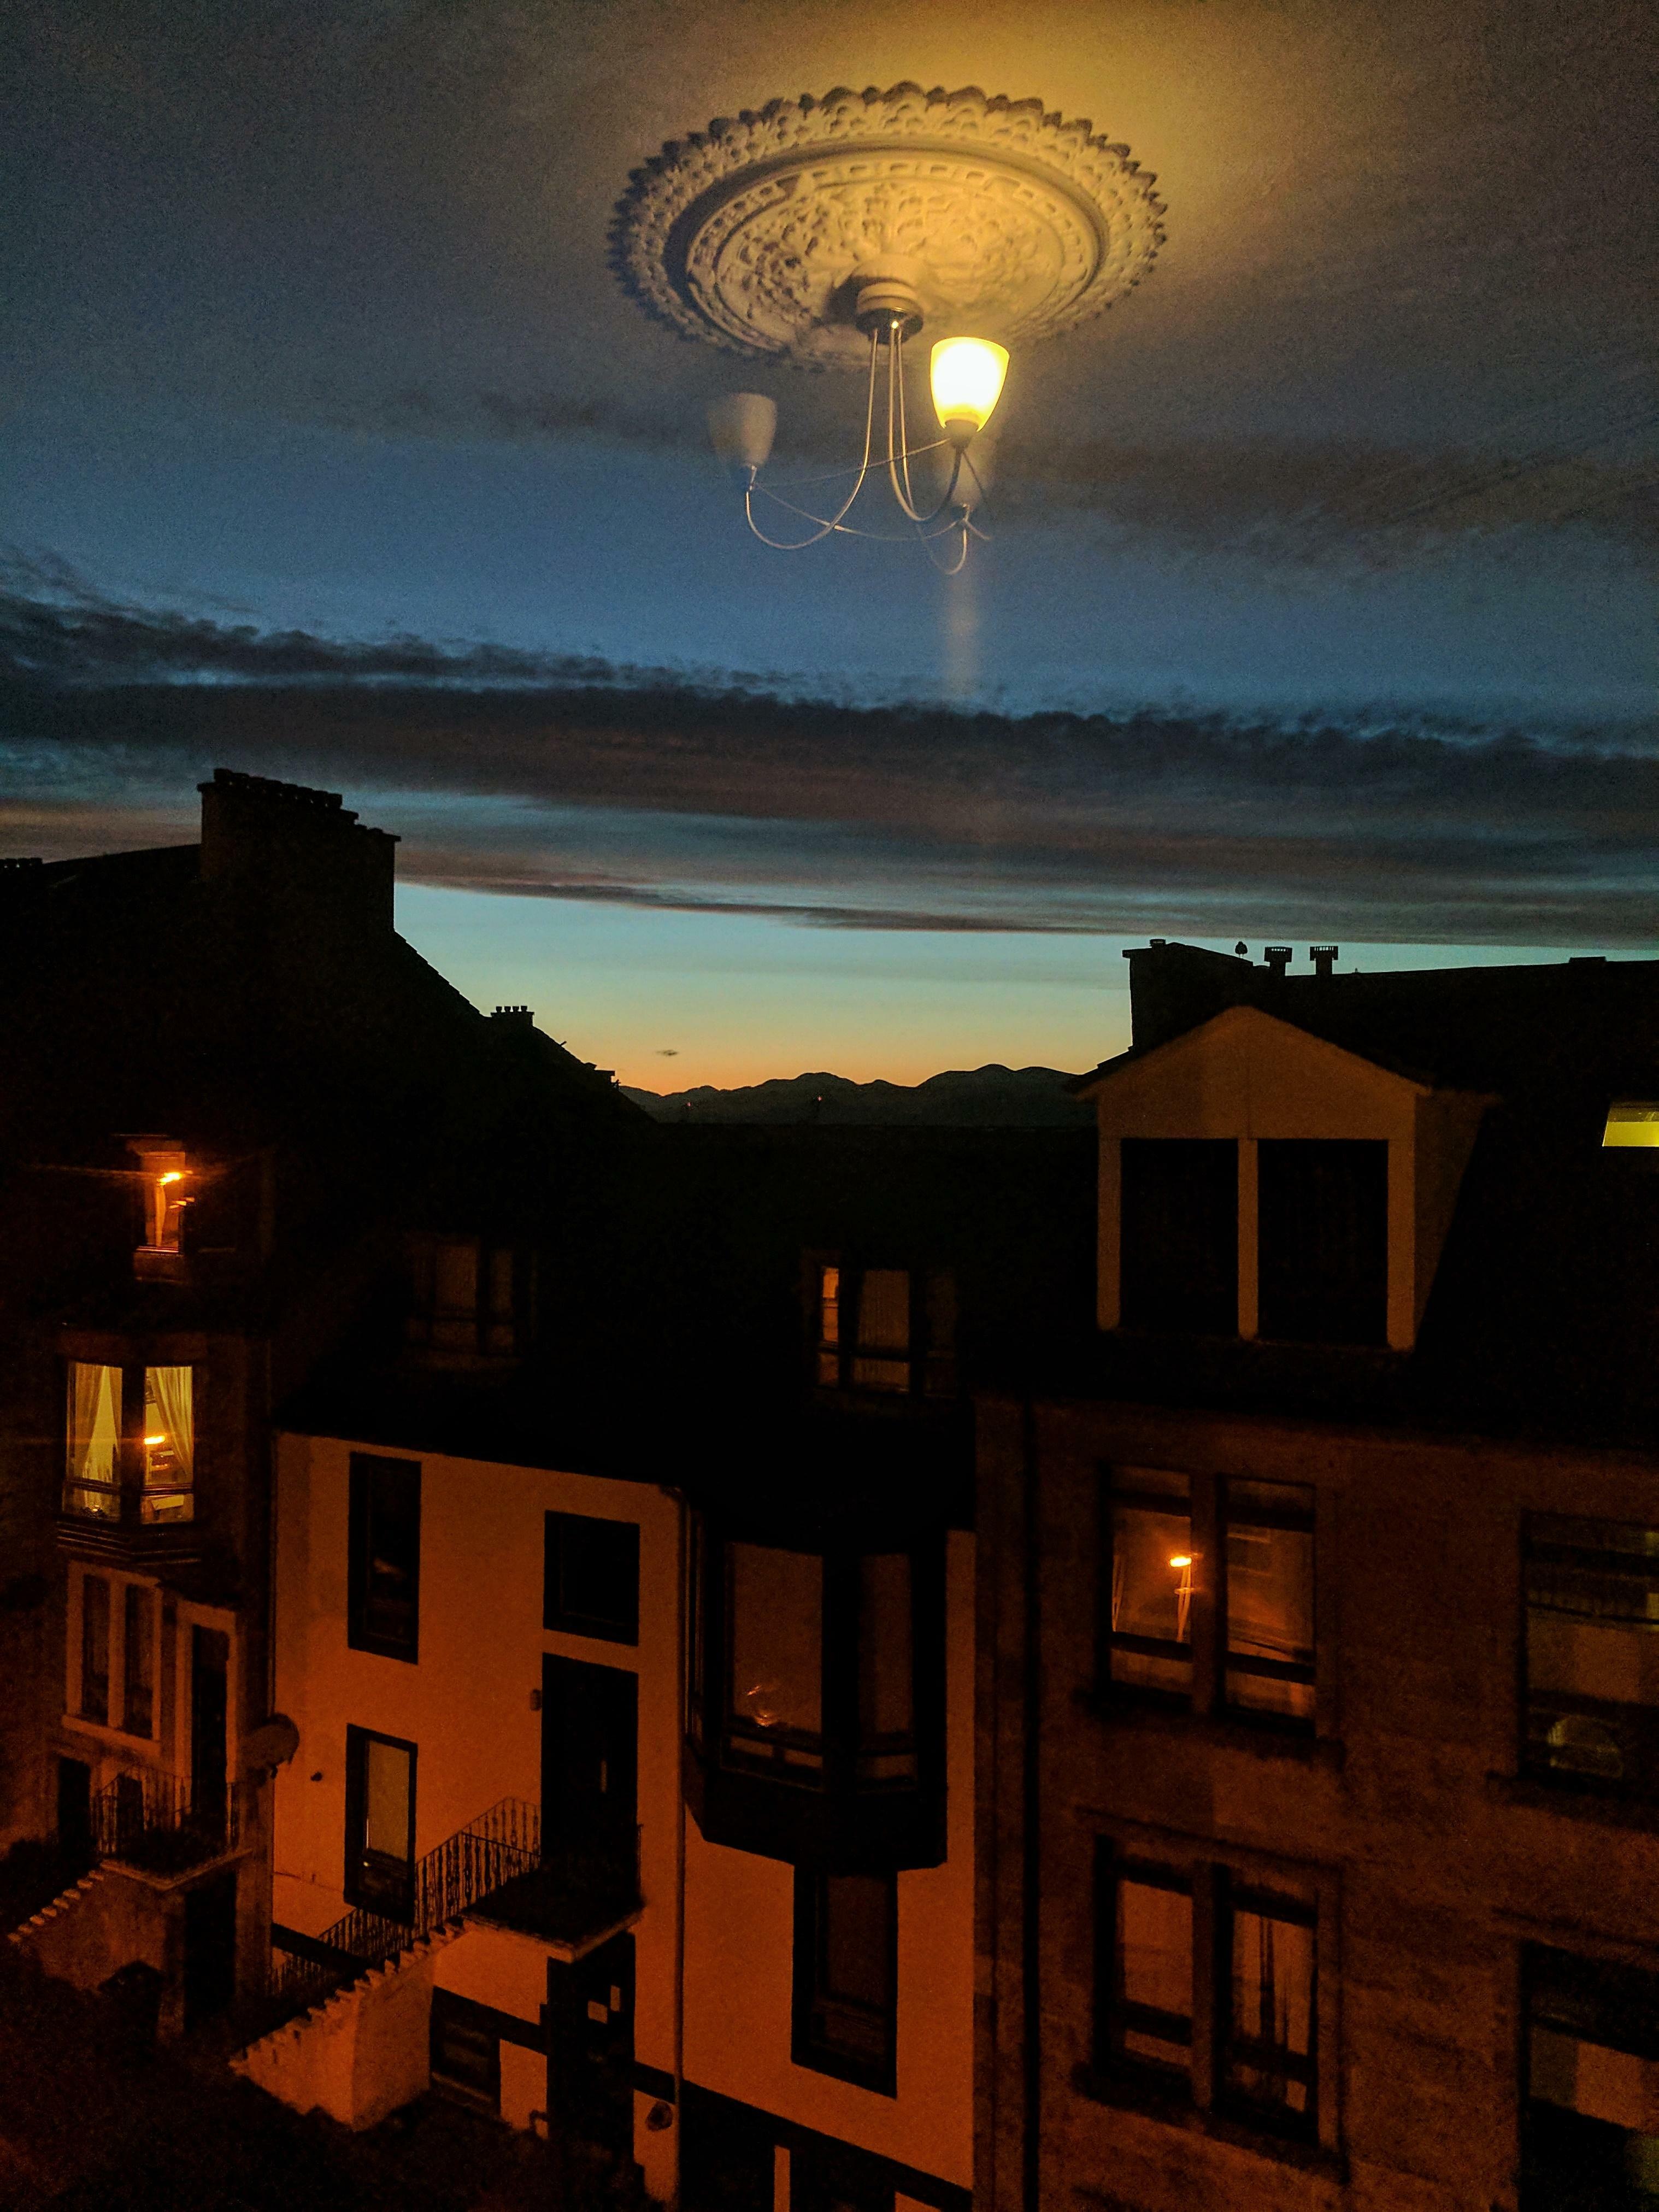 Caught The Reflection Of The Light In The Window, Looks Like It's Floating In The Sky